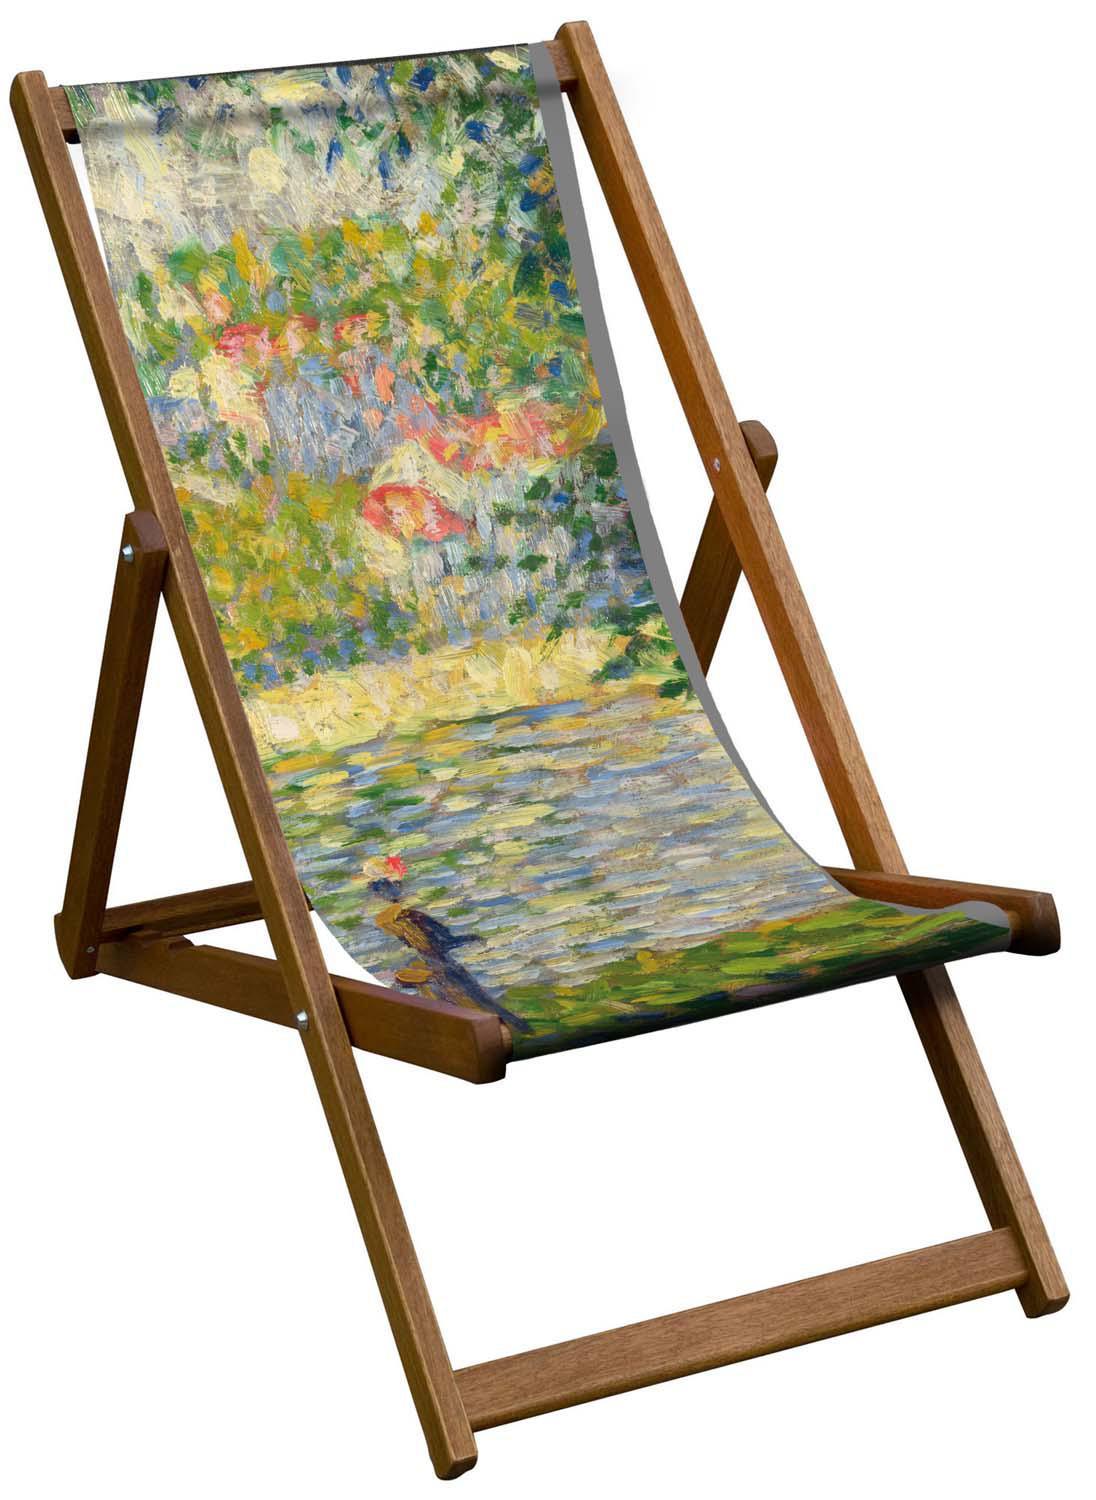 The Morning Walk - Georges Seurat - National Gallery Deckchair